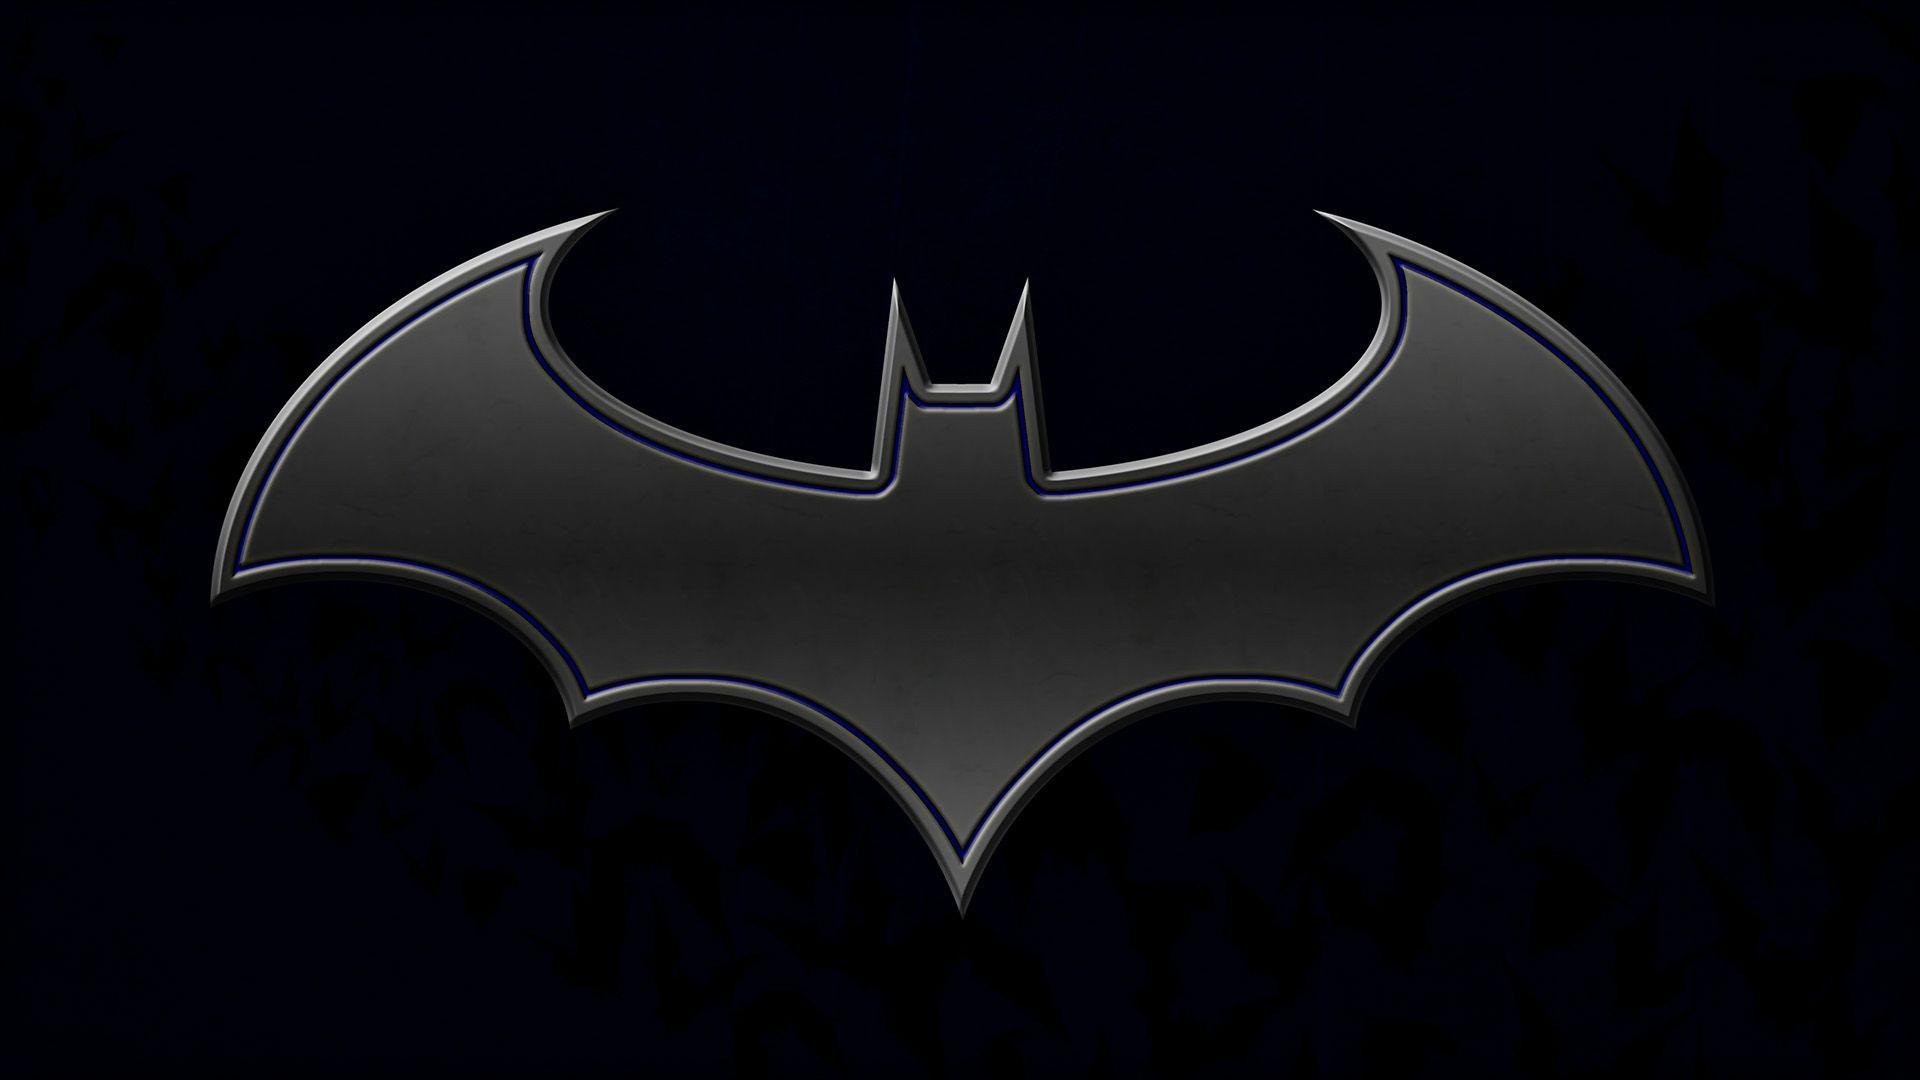 Batman Logo wallpapers for desktop, download free Batman Logo pictures and  backgrounds for PC | mob.org